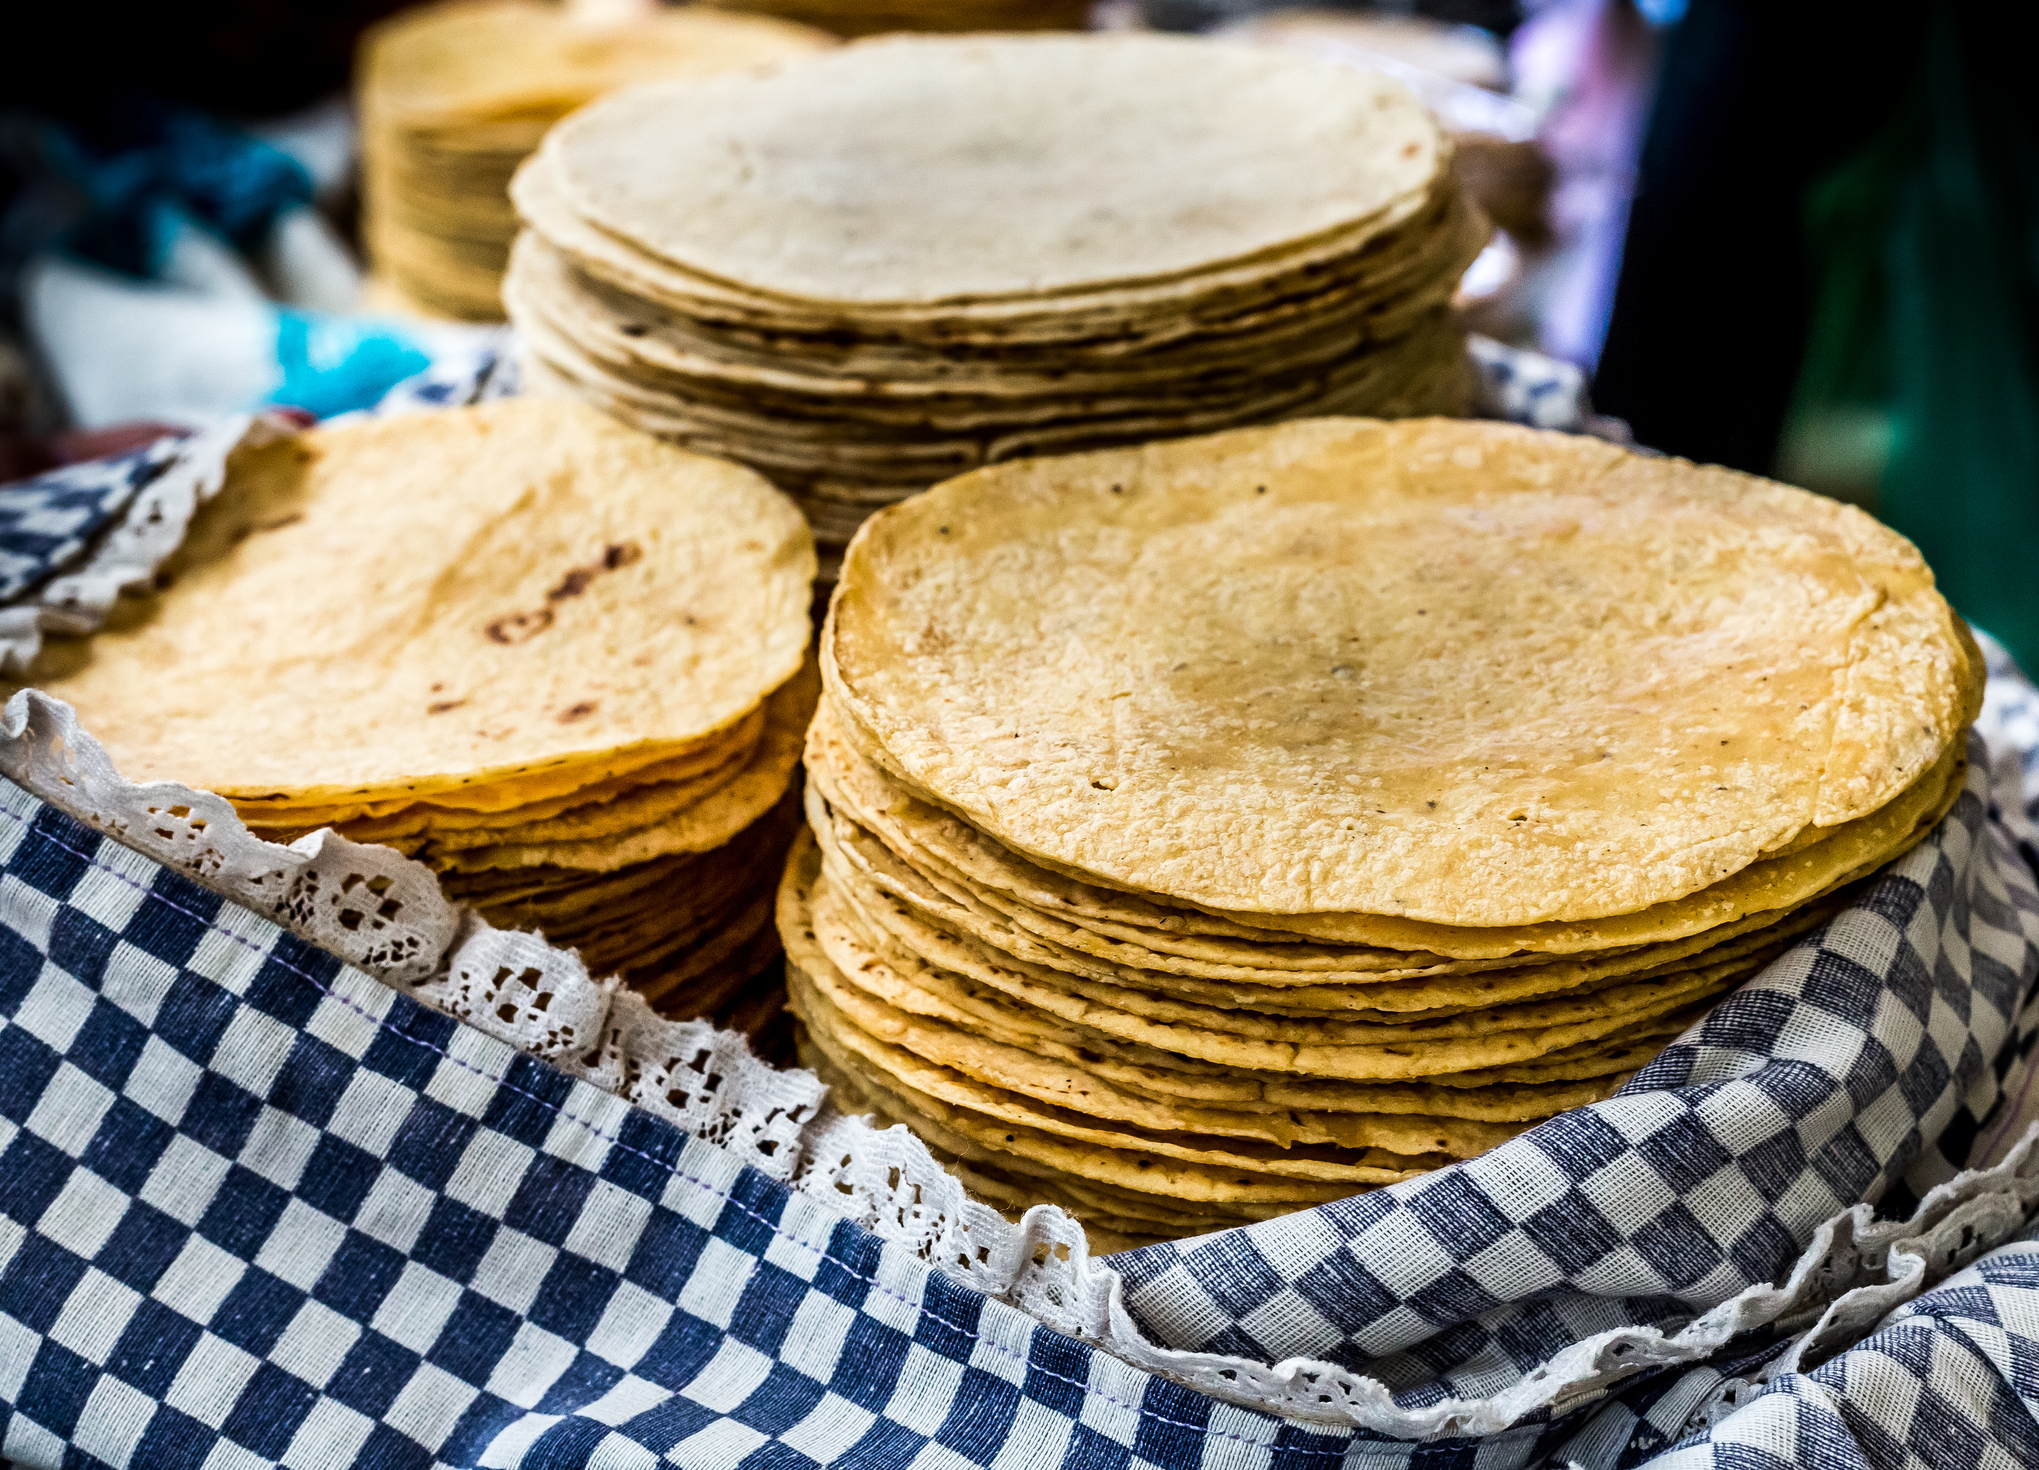  The best real traditional authentic Mexican tortillas 